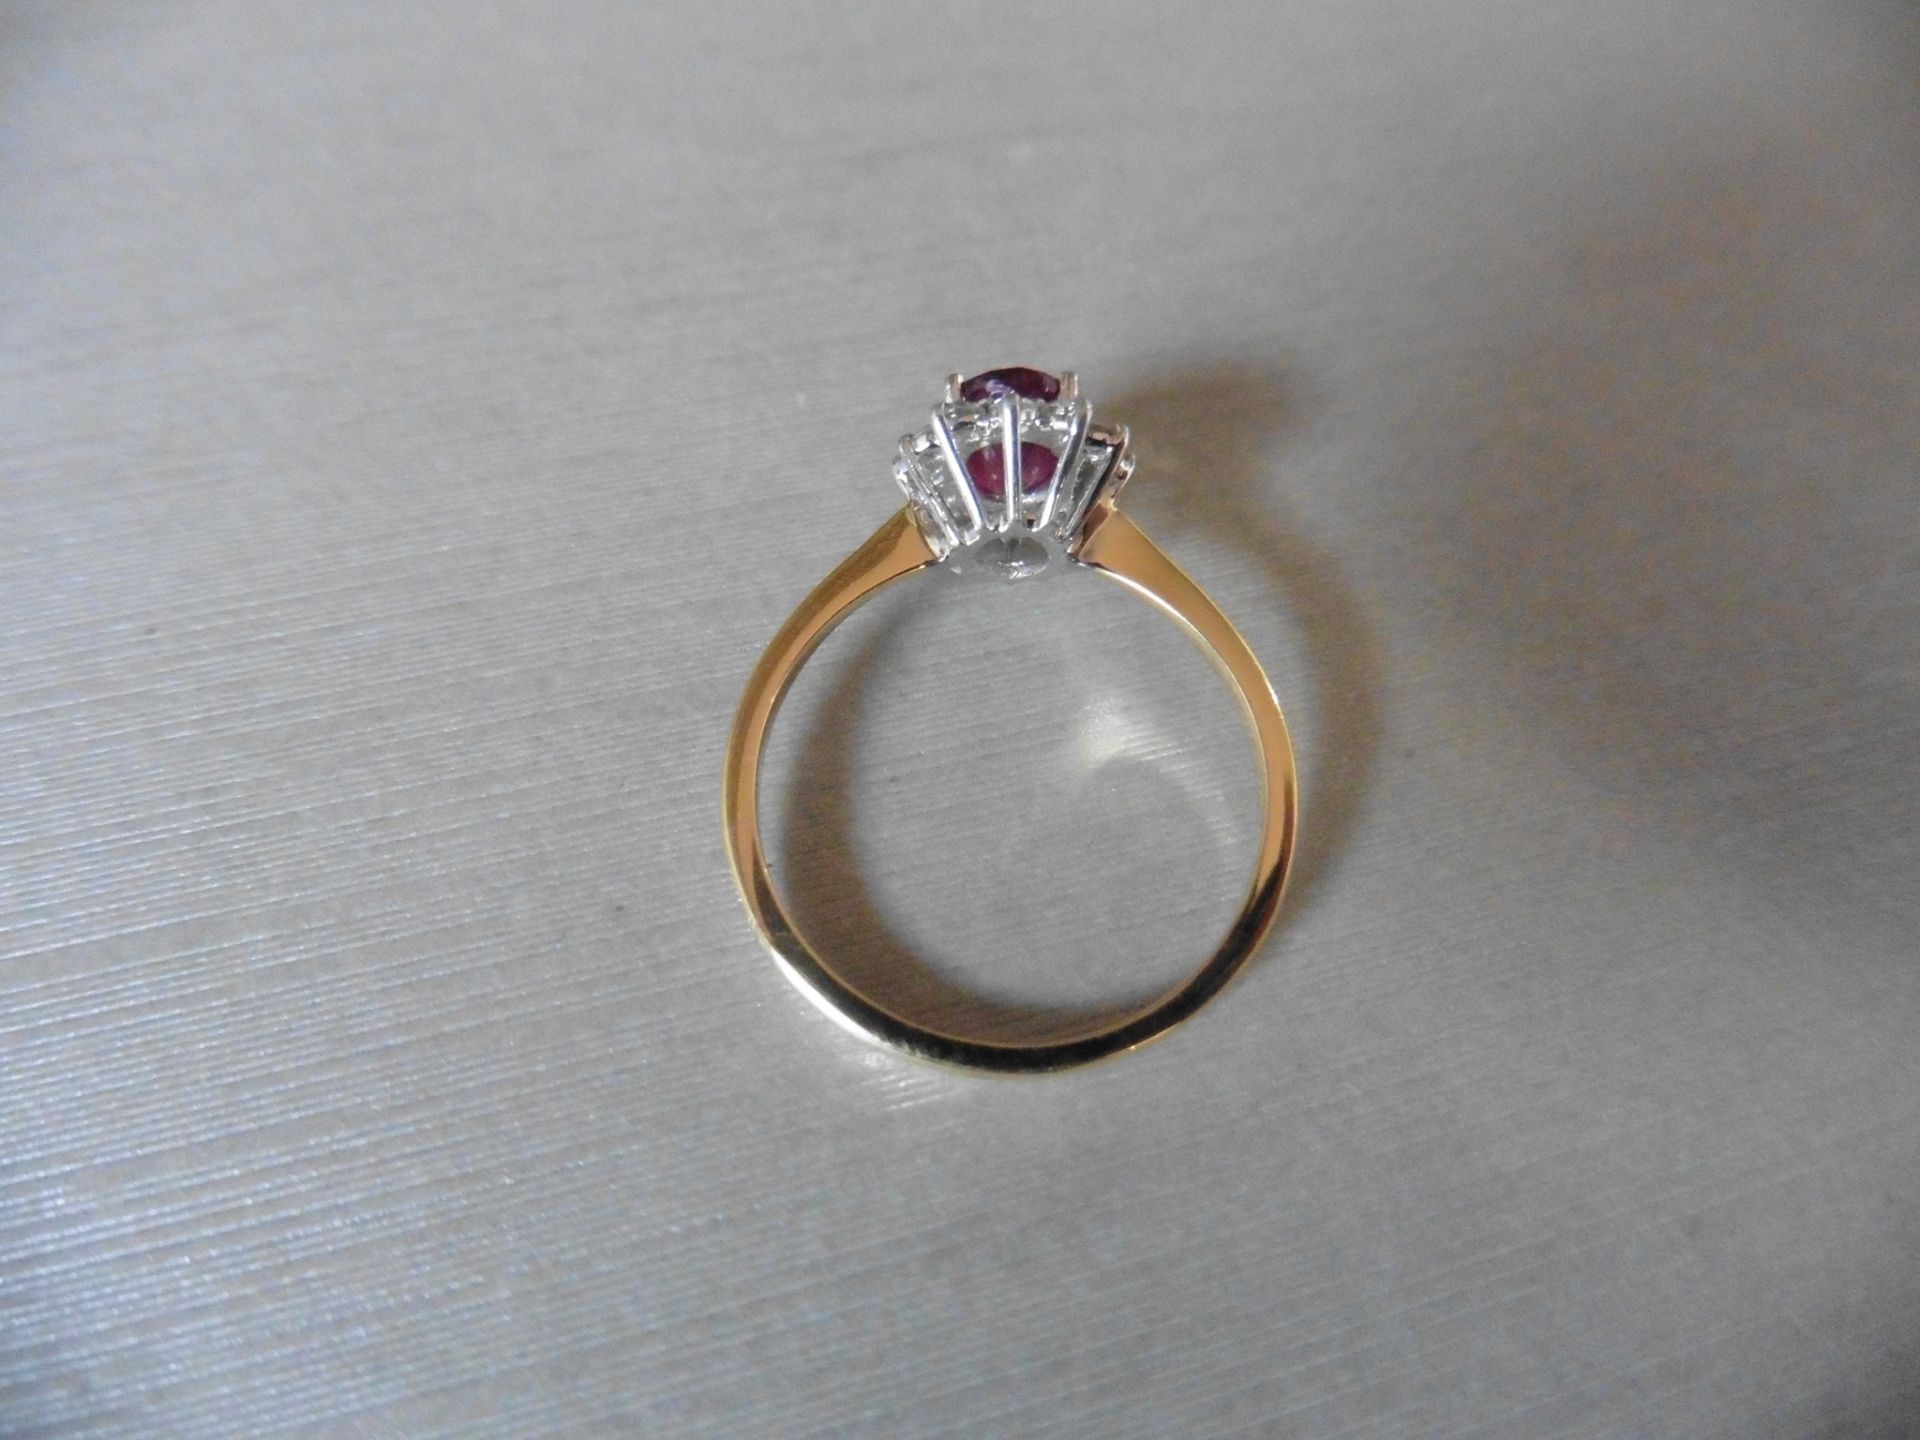 0.75Ct / 0.30Ct Ruby And Diamond Cluster Ring. - Image 2 of 3